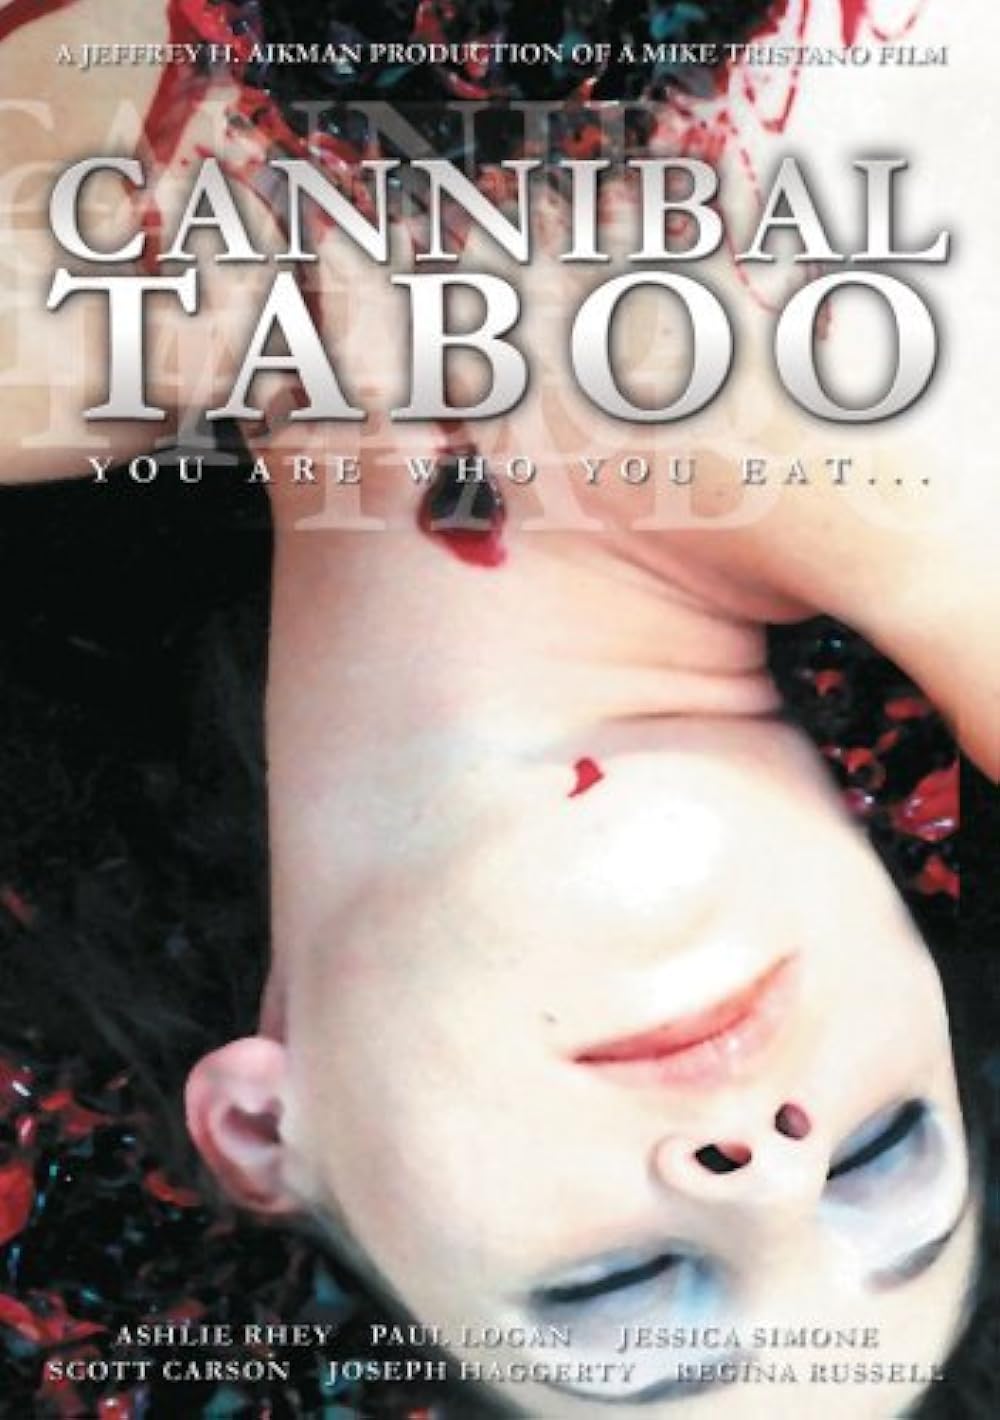 donna sterban recommends taboo movie online free pic